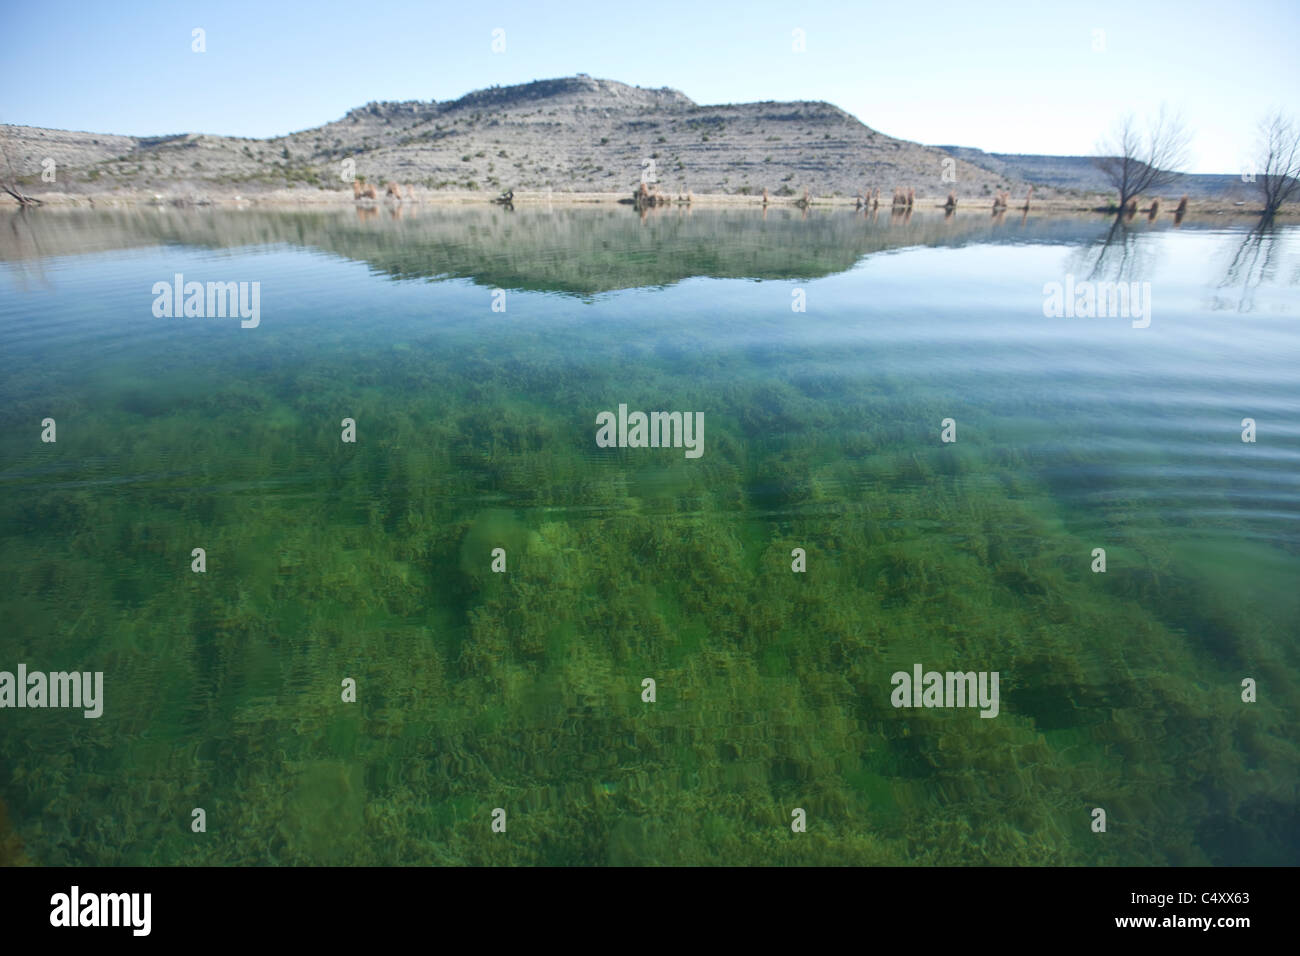 Green weeds growing on the bottom of a clear spring-fed lake on a private ranch near the Pecos River in west Texas, USA Stock Photo